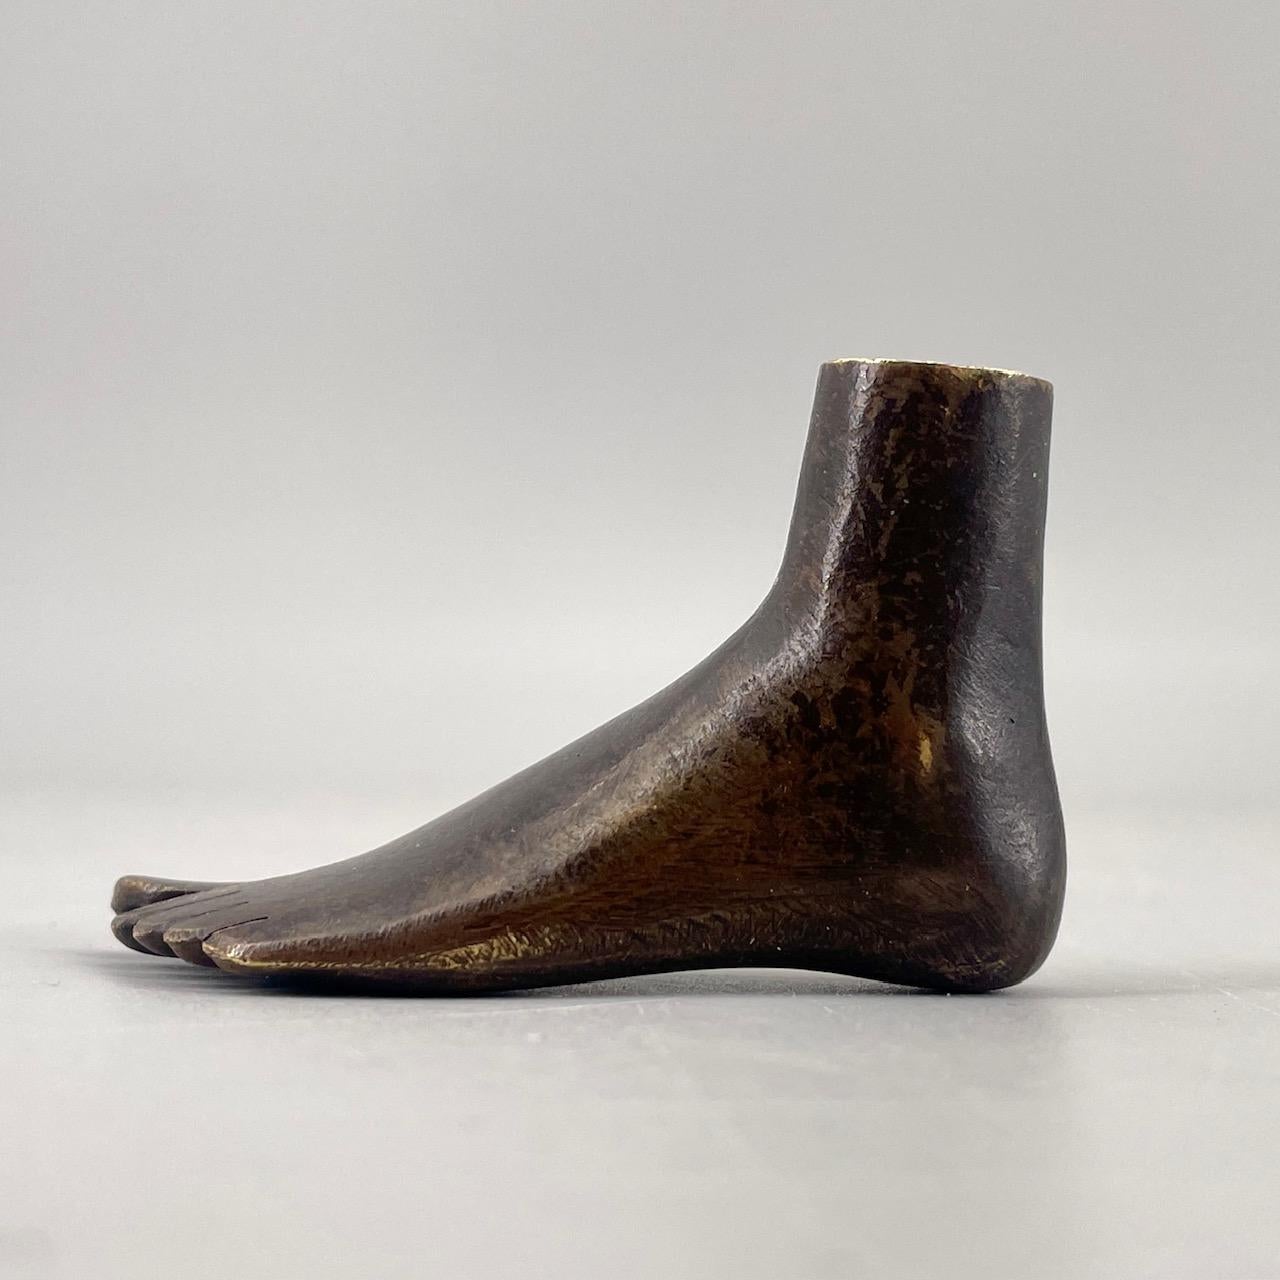 Bronze Foot an Early Example from the Carl Aubock Workshop Sculpture Paperweight In Fair Condition For Sale In Hyattsville, MD